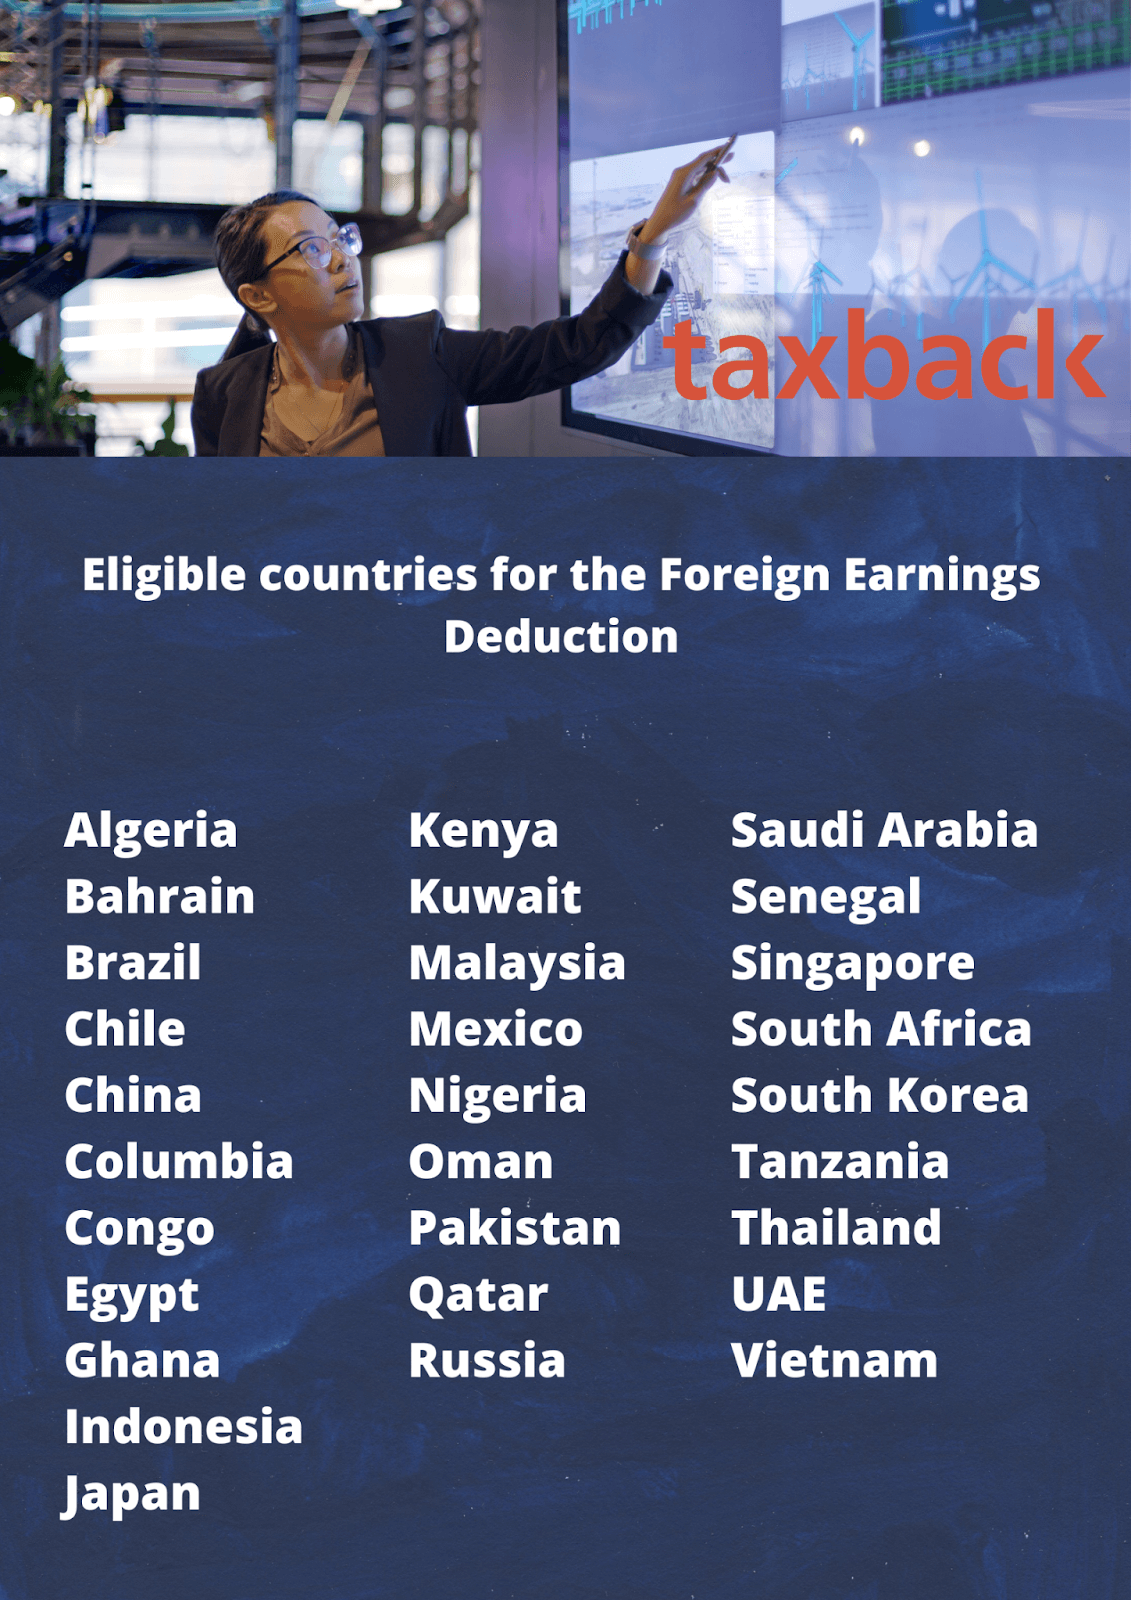 Eligible countries for the Foreign Earnings Deduction